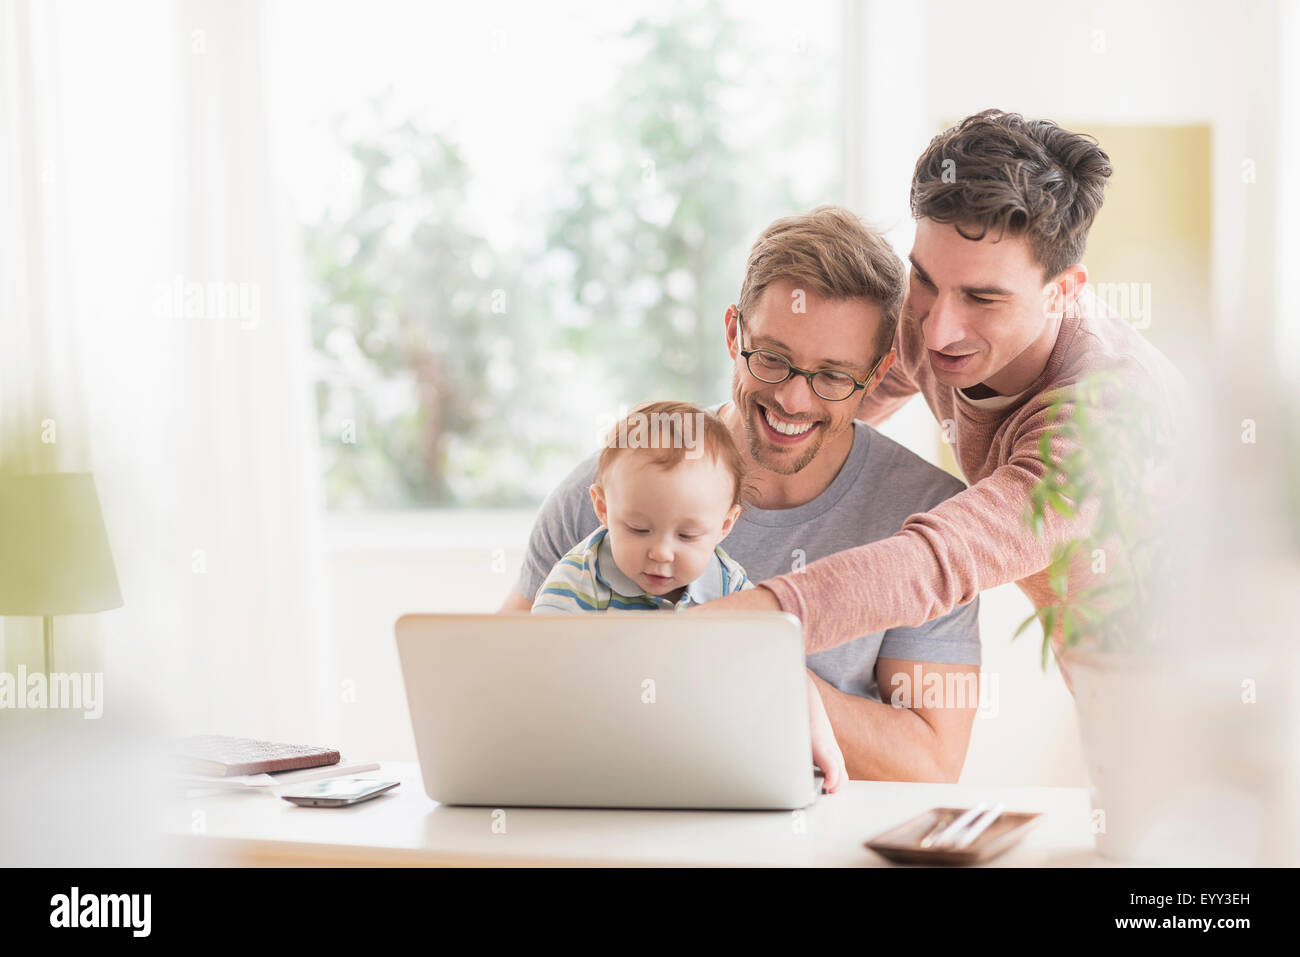 Caucasian gay fathers and baby using laptop Stock Photo